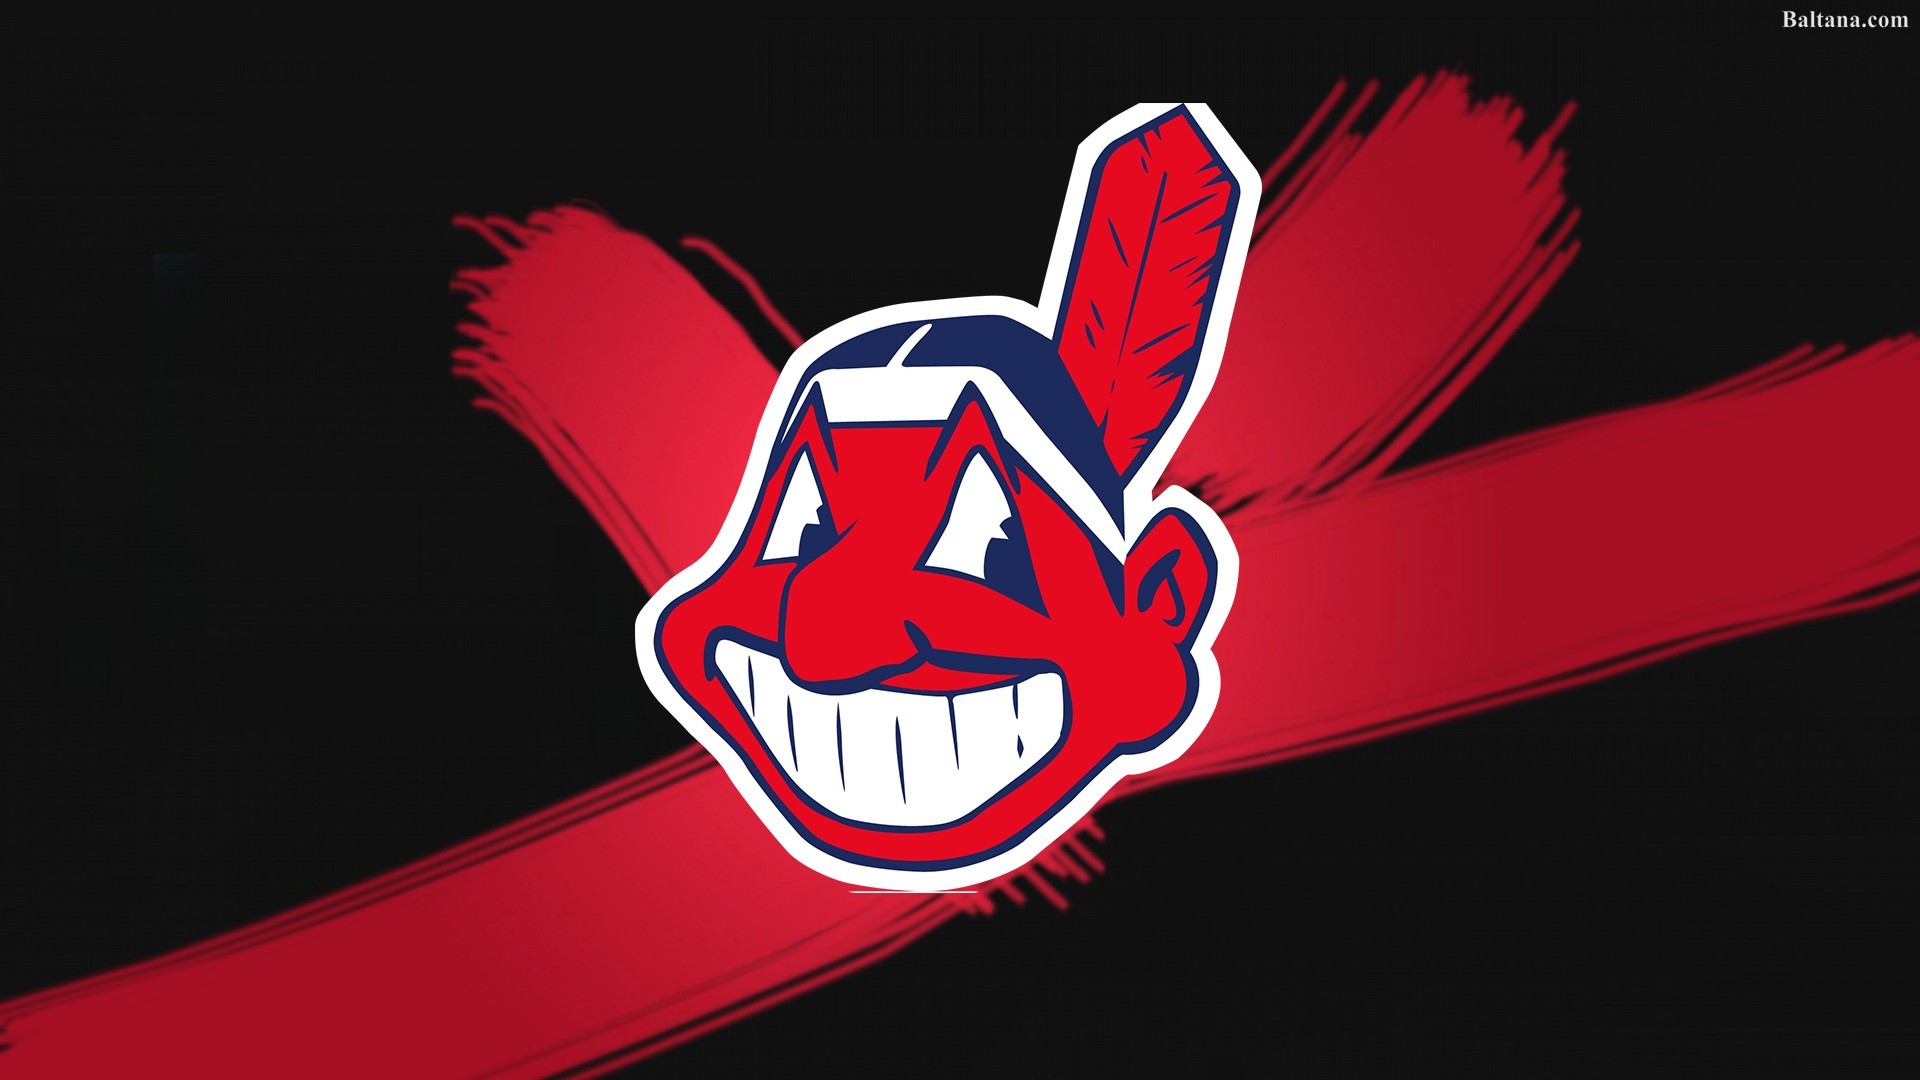 cleveland indians HD wallpapers backgrounds